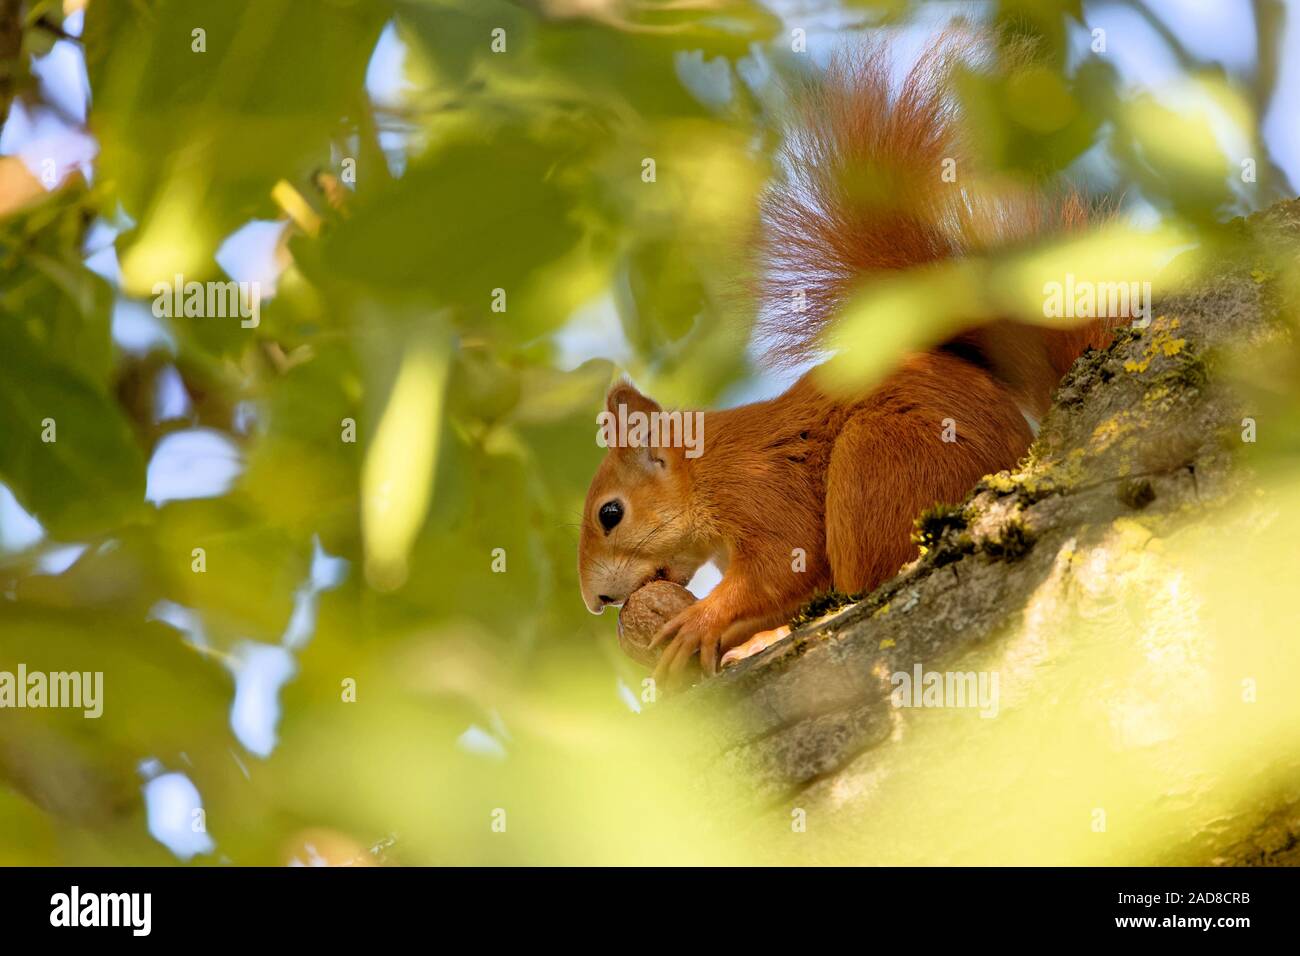 Eurasian red squirrel eating a walnut Stock Photo